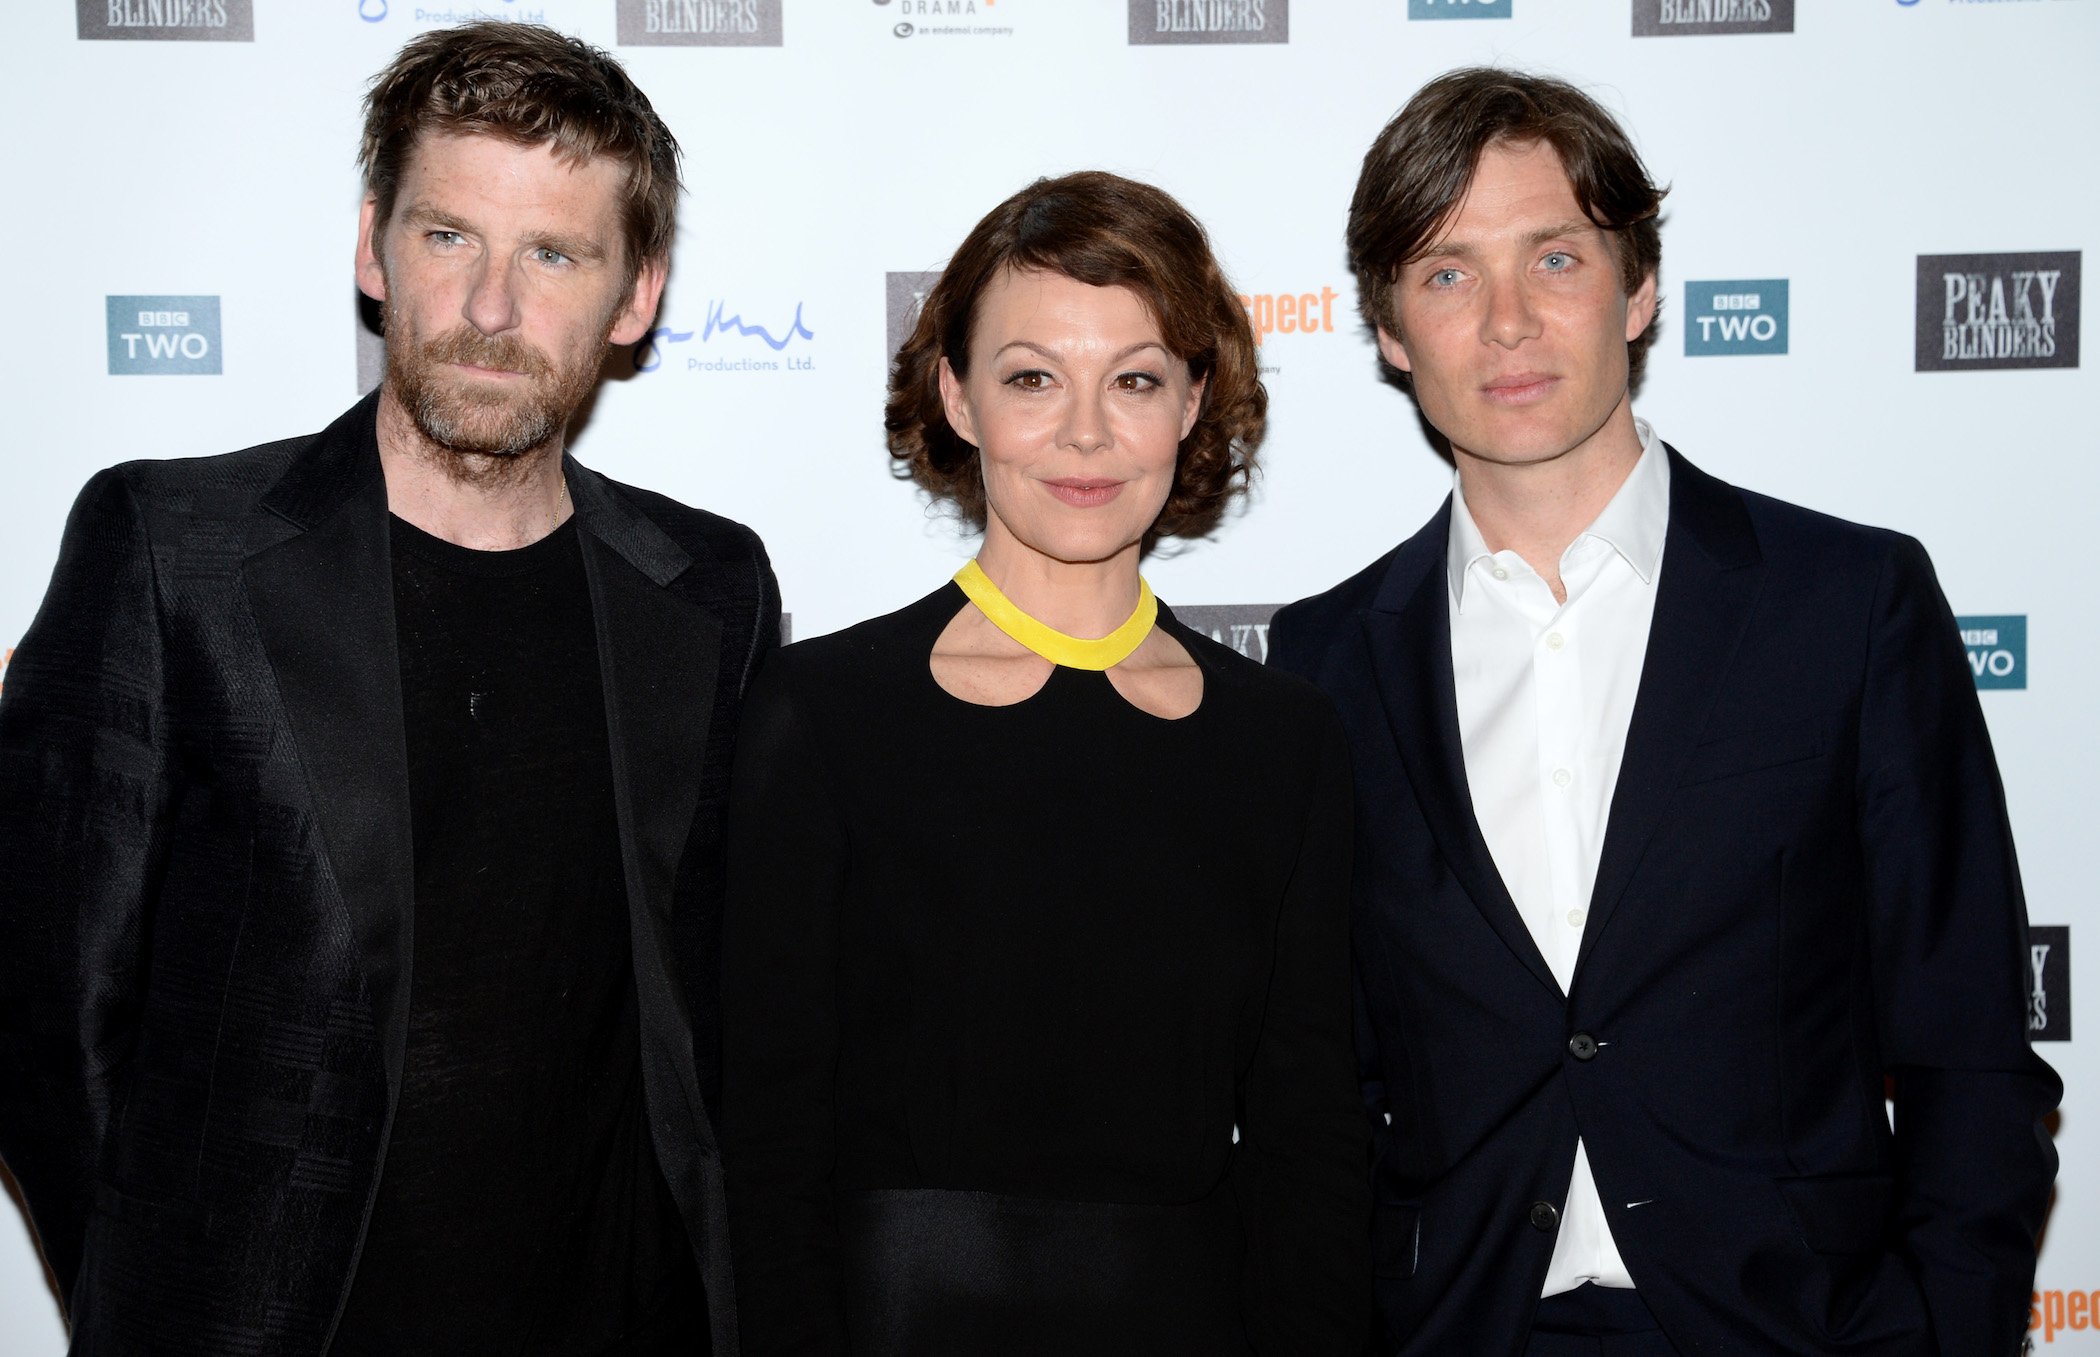 Paul Anderson, Helen McCrory, and Cillian Murphy attend the premiere of 'Peaky Blinders'